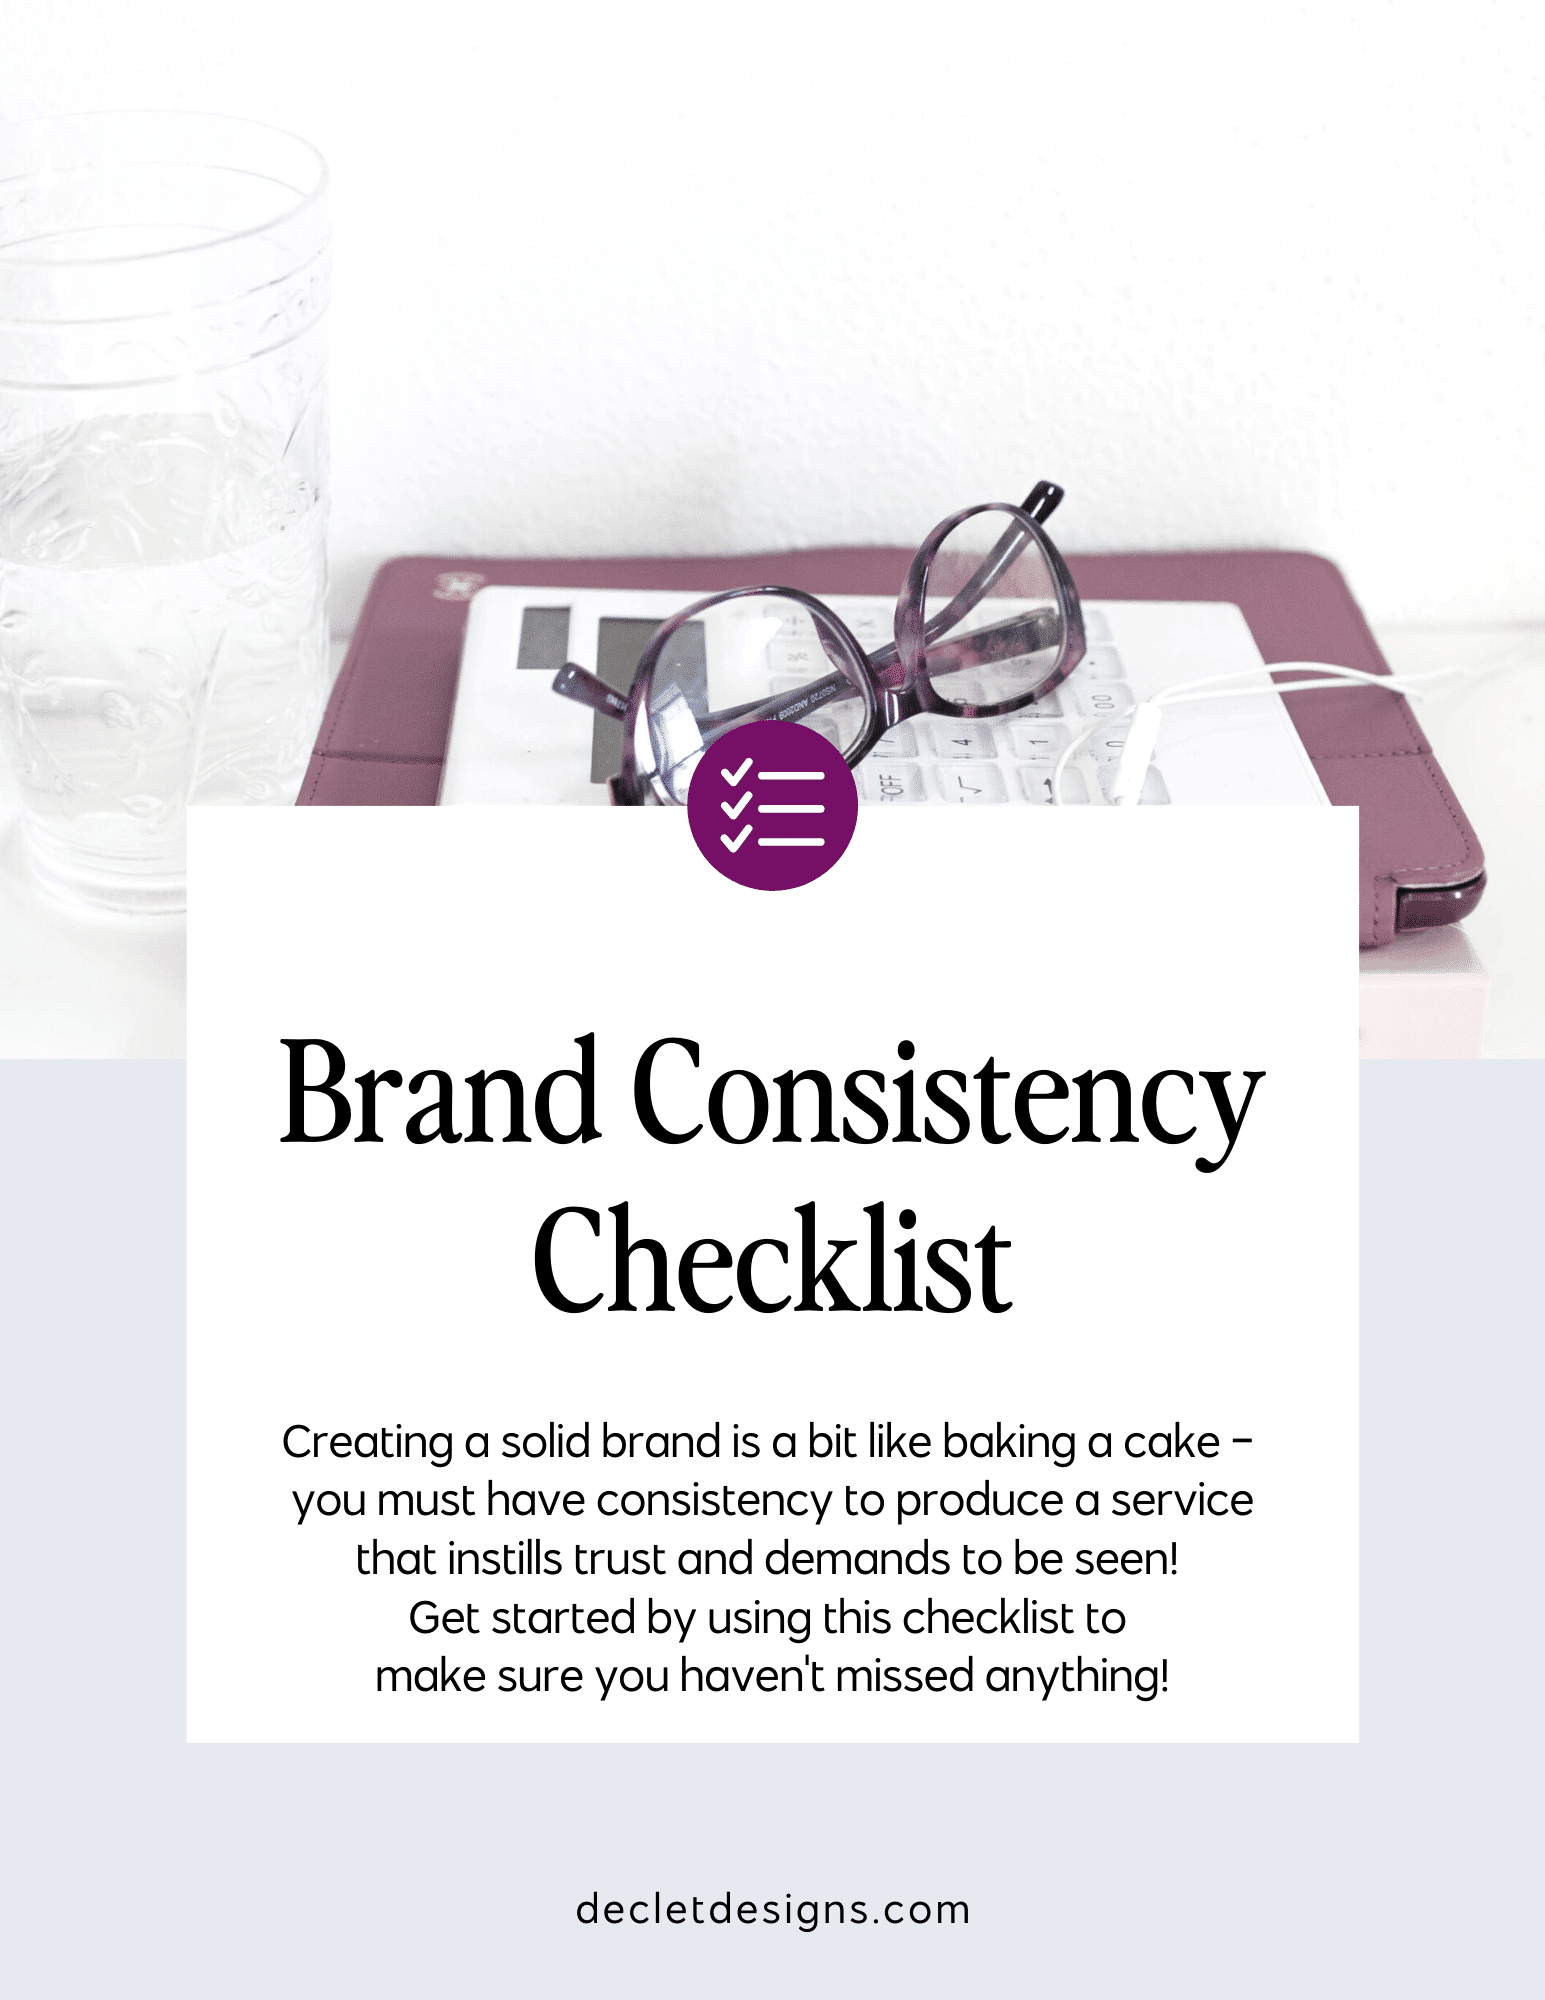 Brand consistency checklist for private practice dietitian